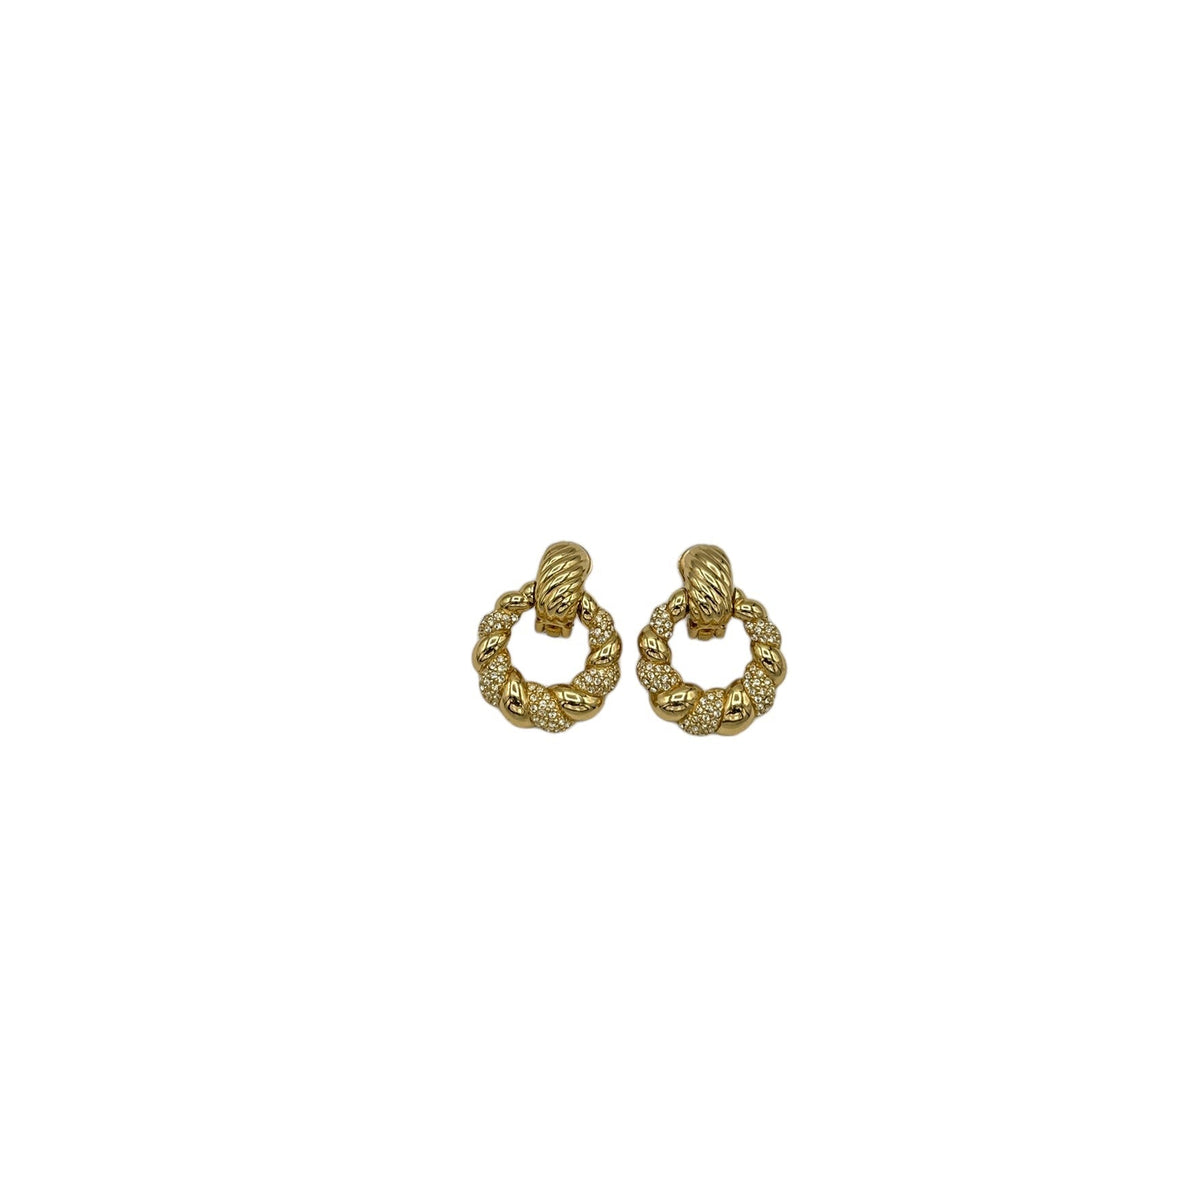 Christian Dior Gold Rhinestone Twisted Door Knocker Clip-On Earrings - 24 Wishes Vintage Jewelry